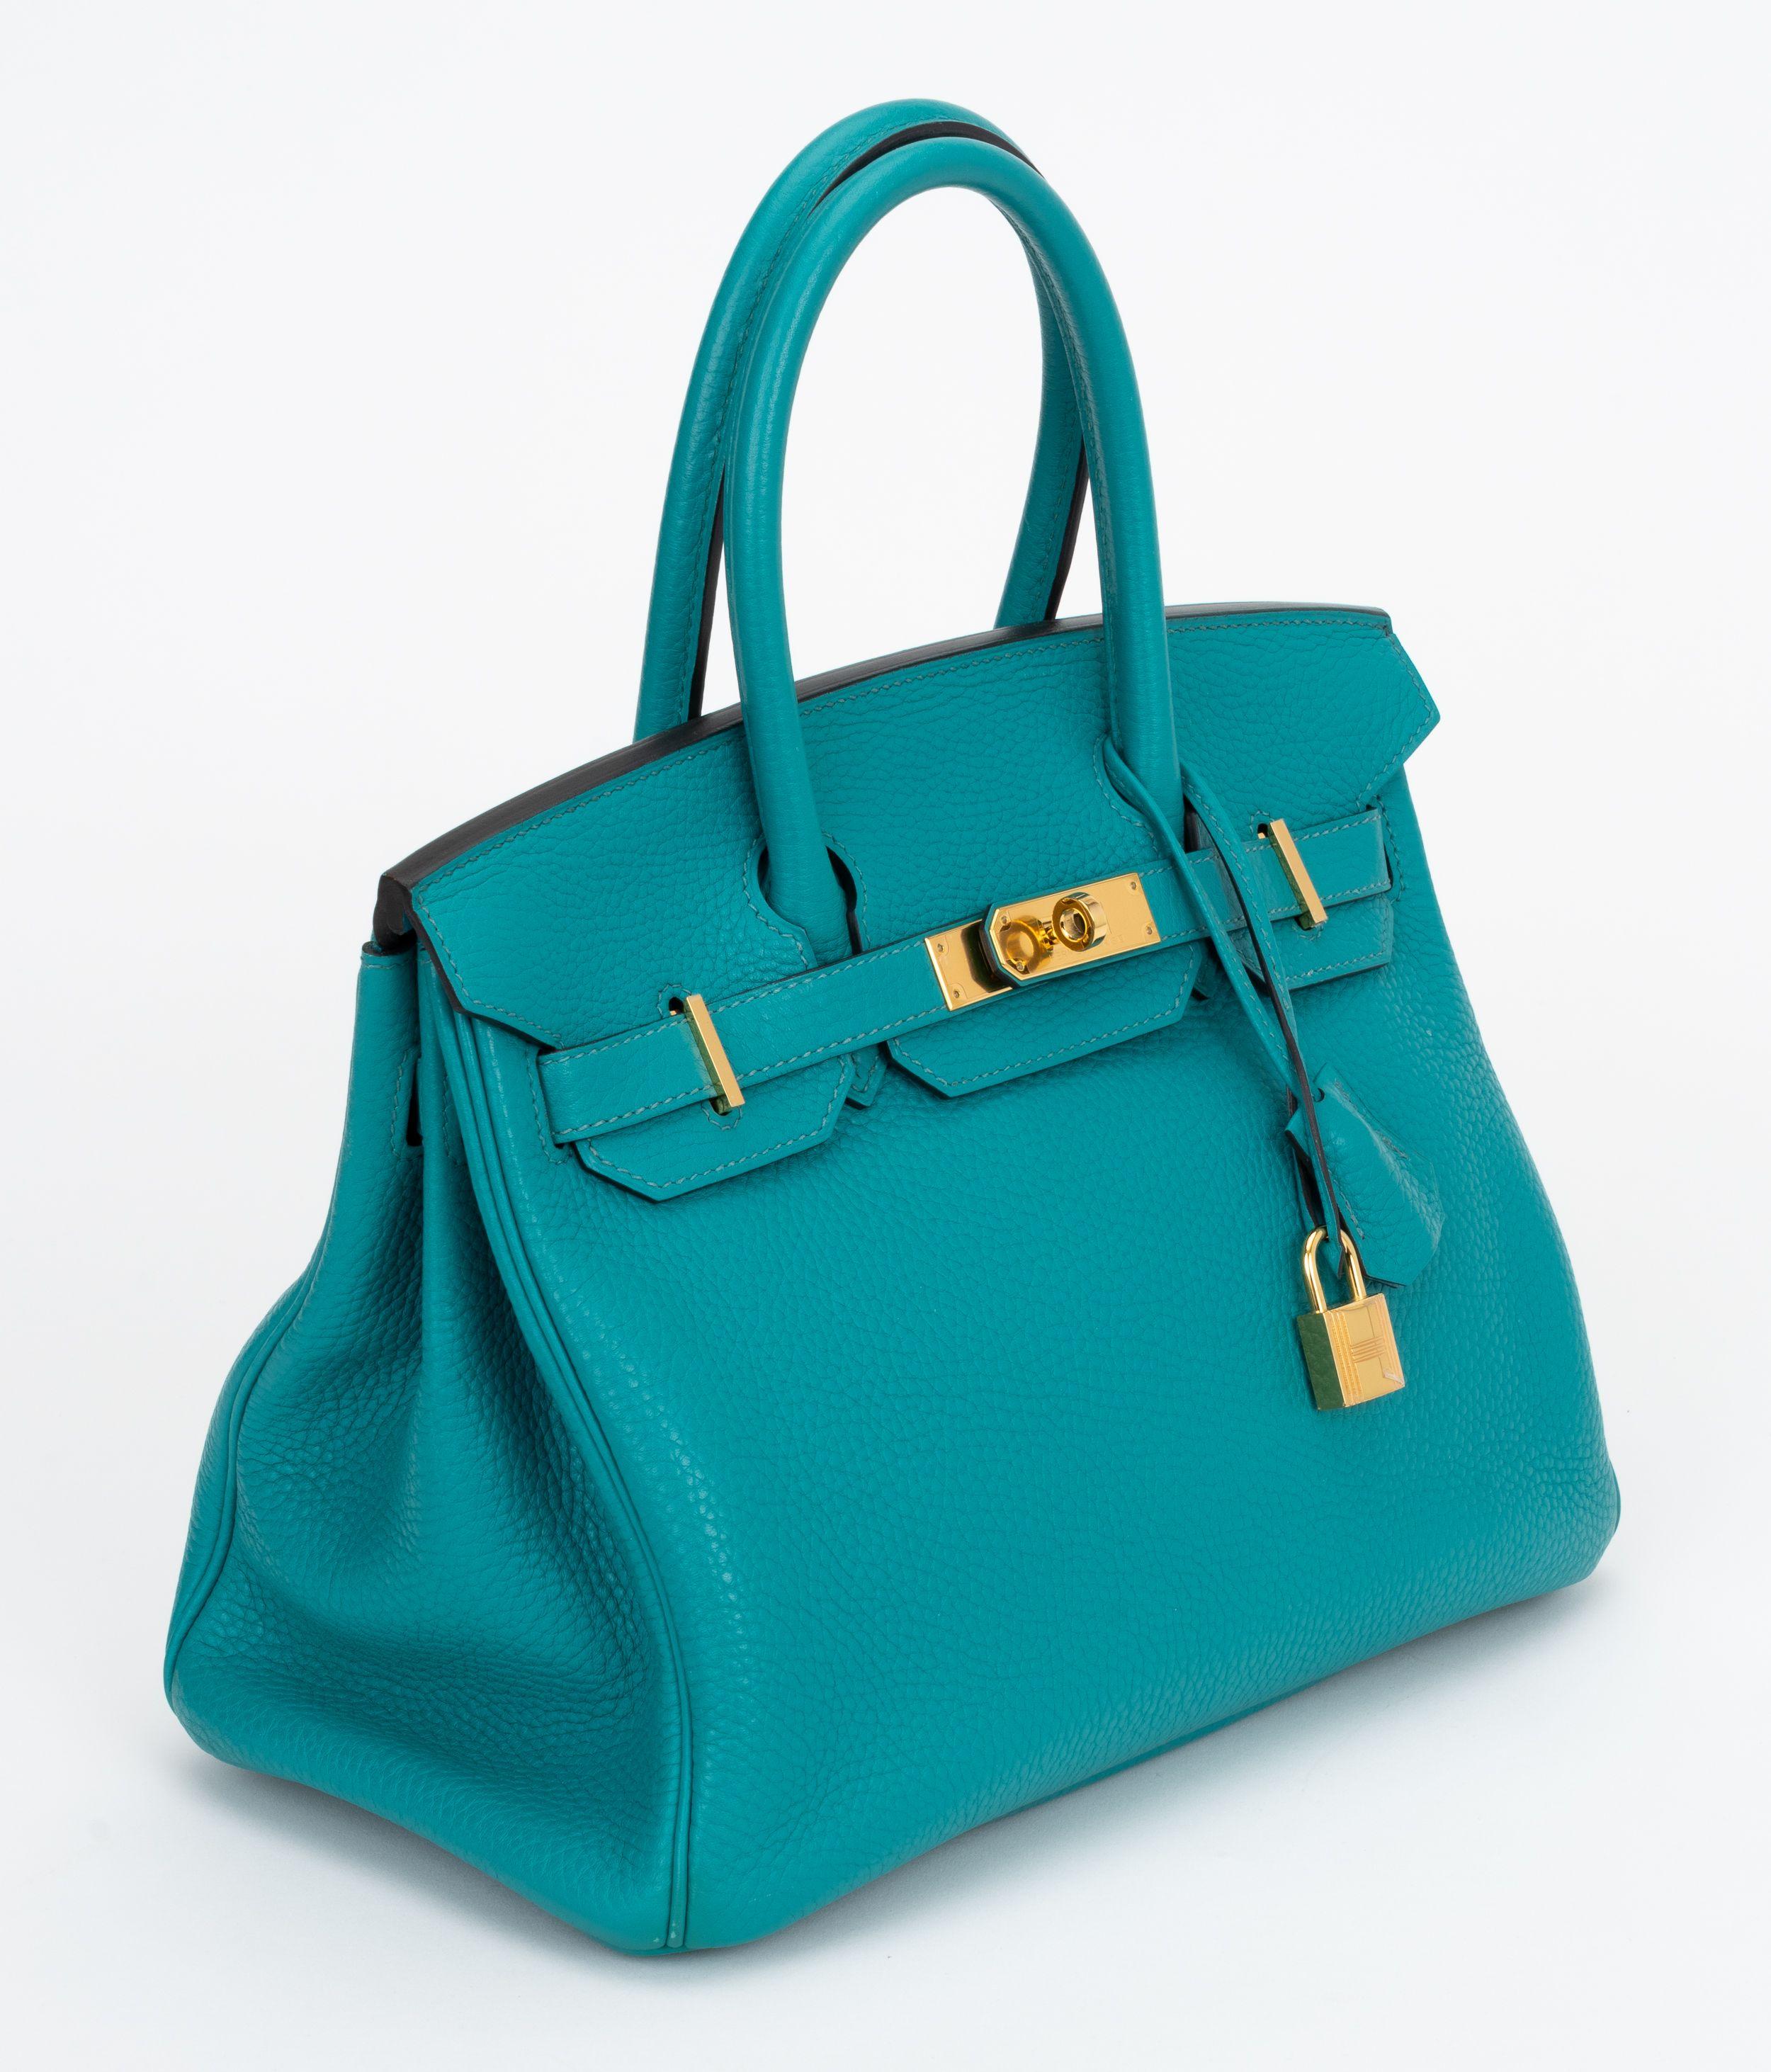 Hermès 30cm Birkin in blue paon taurillon clemence leather with gold tone hardware. Handle drop, 3.75